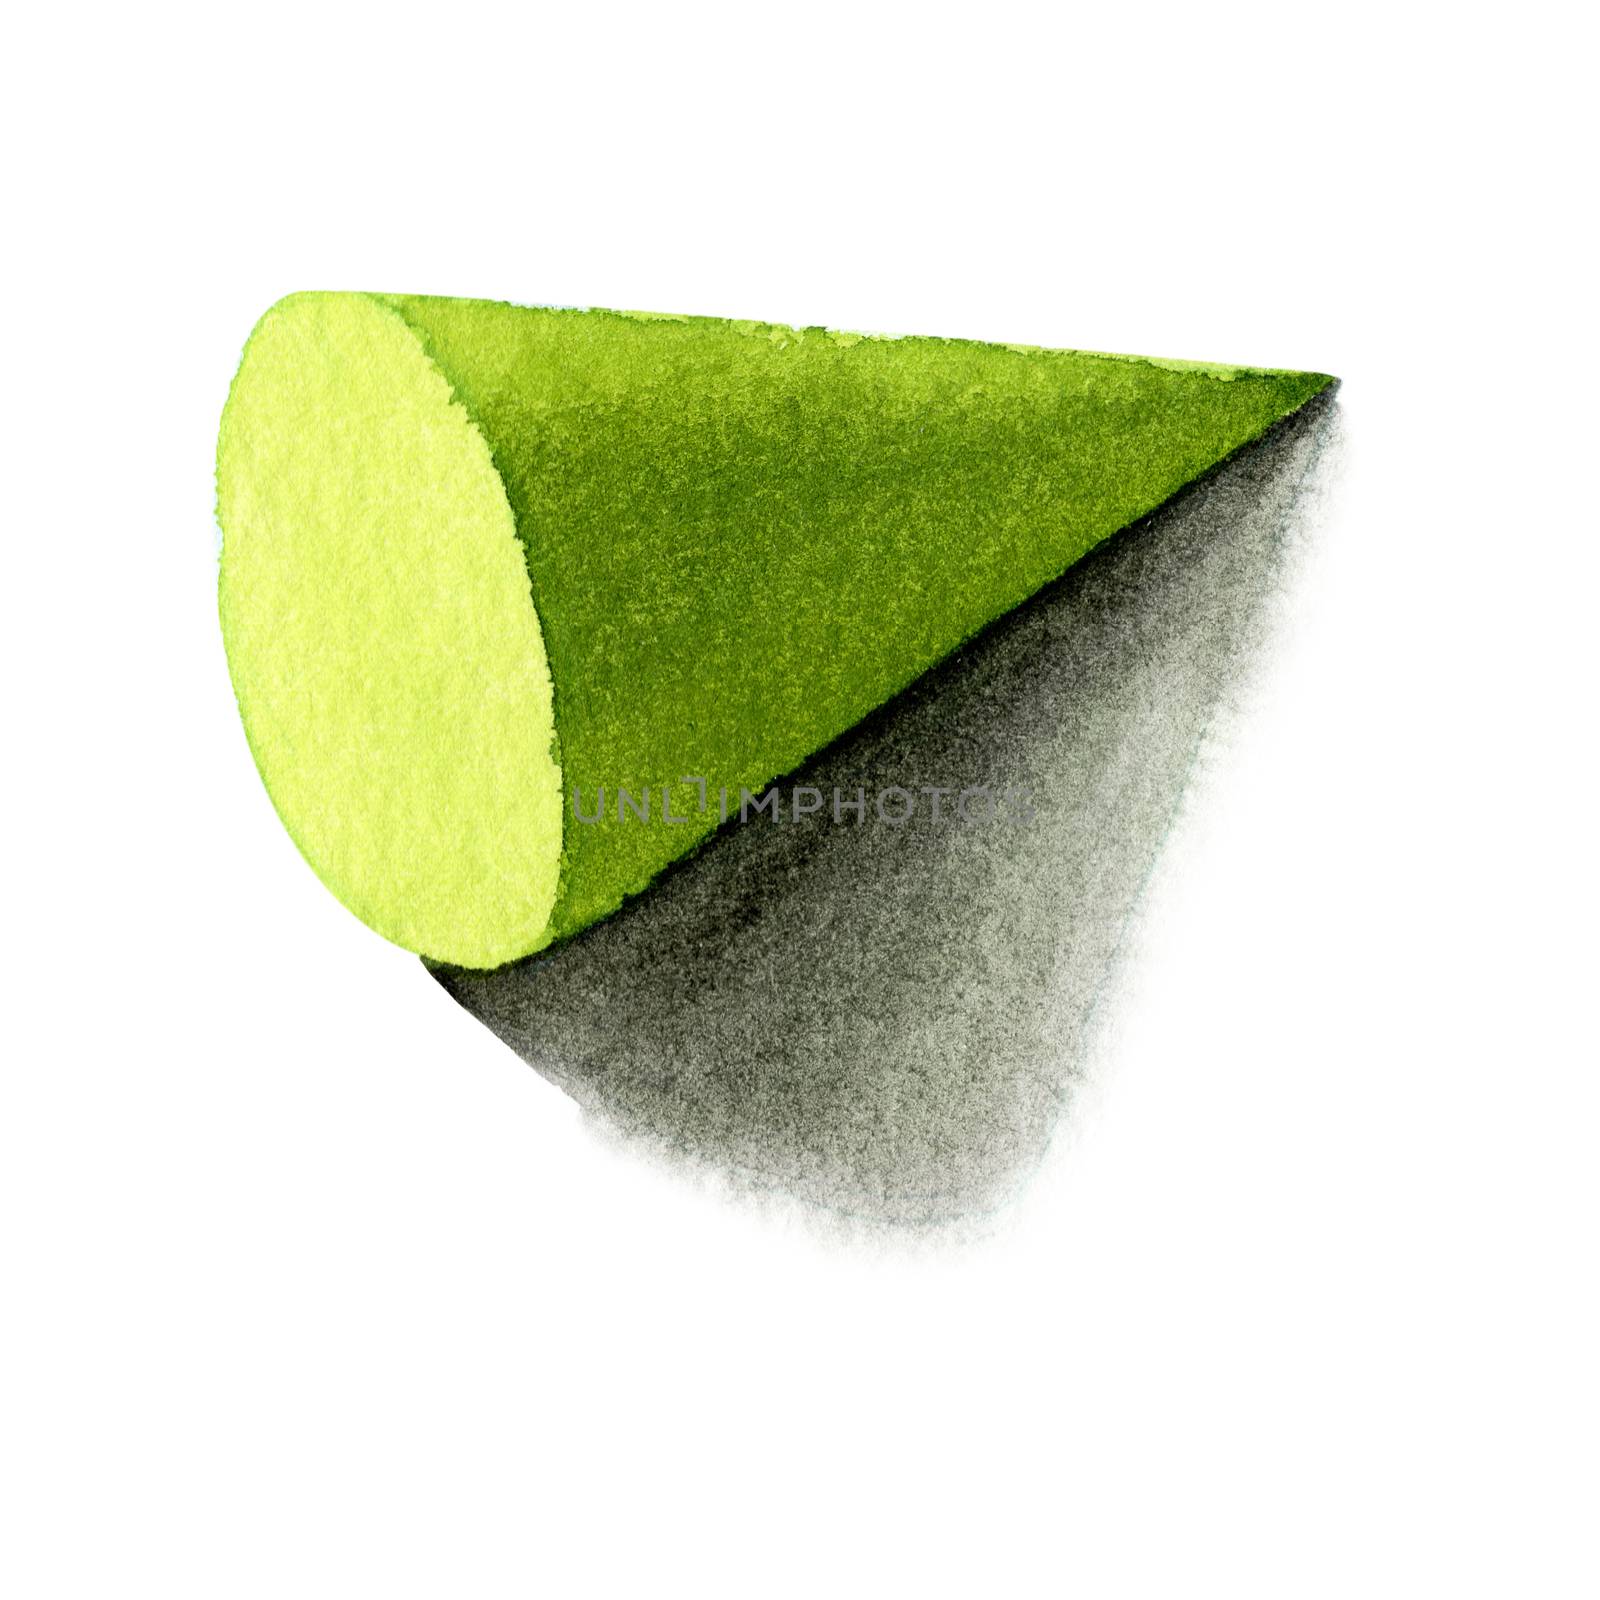 Green cone, basic geometric shapes with dramatic light and shadow in watercolor style. Solids isolated on a white background. Clipping path.